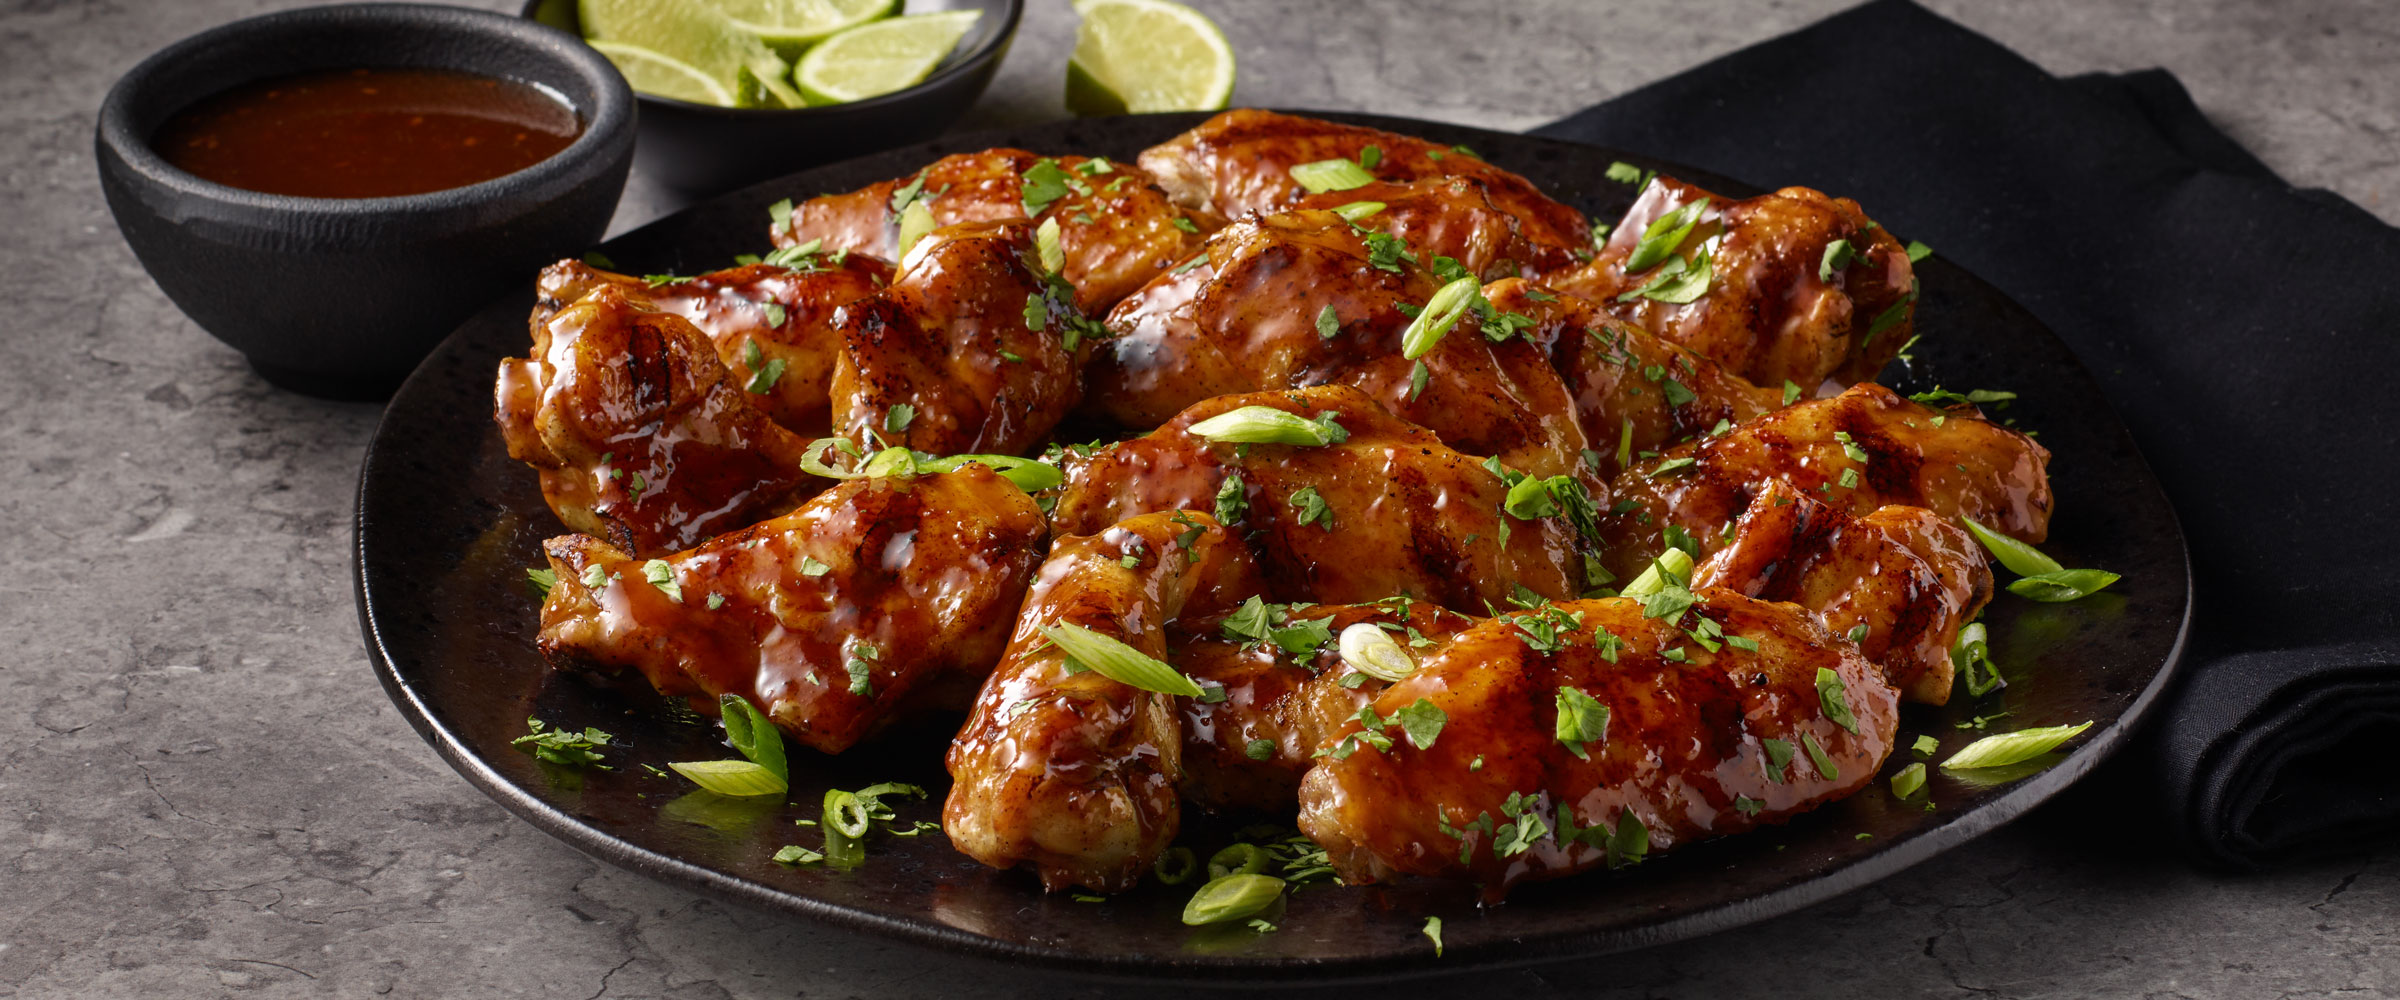 Grilled Korean BBQ Chicken Wings with sliced limes and bbq sauce